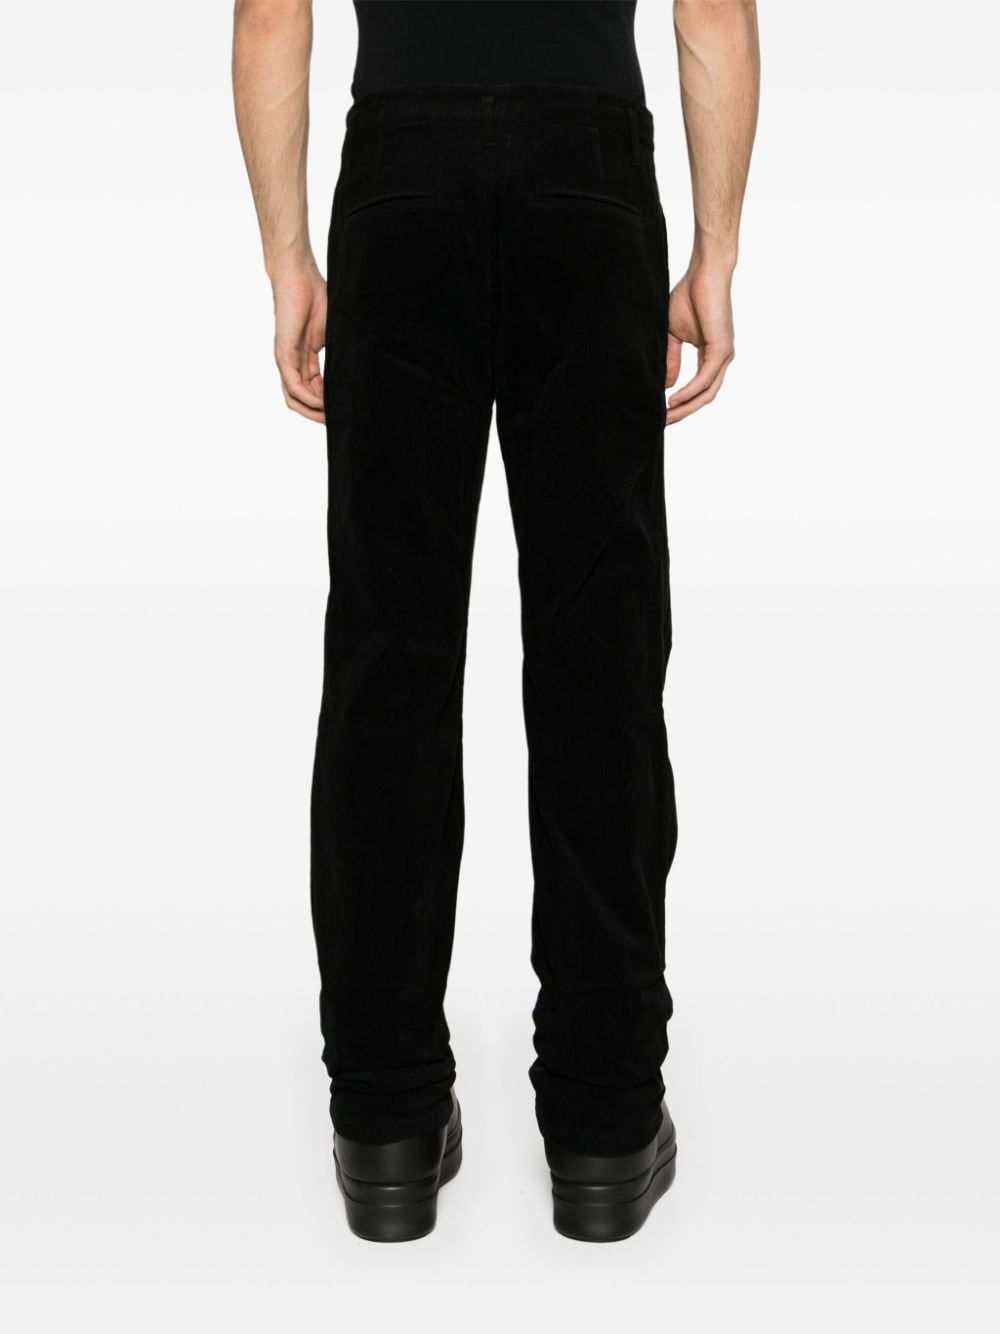 Right corduroy cotton trousers - 4